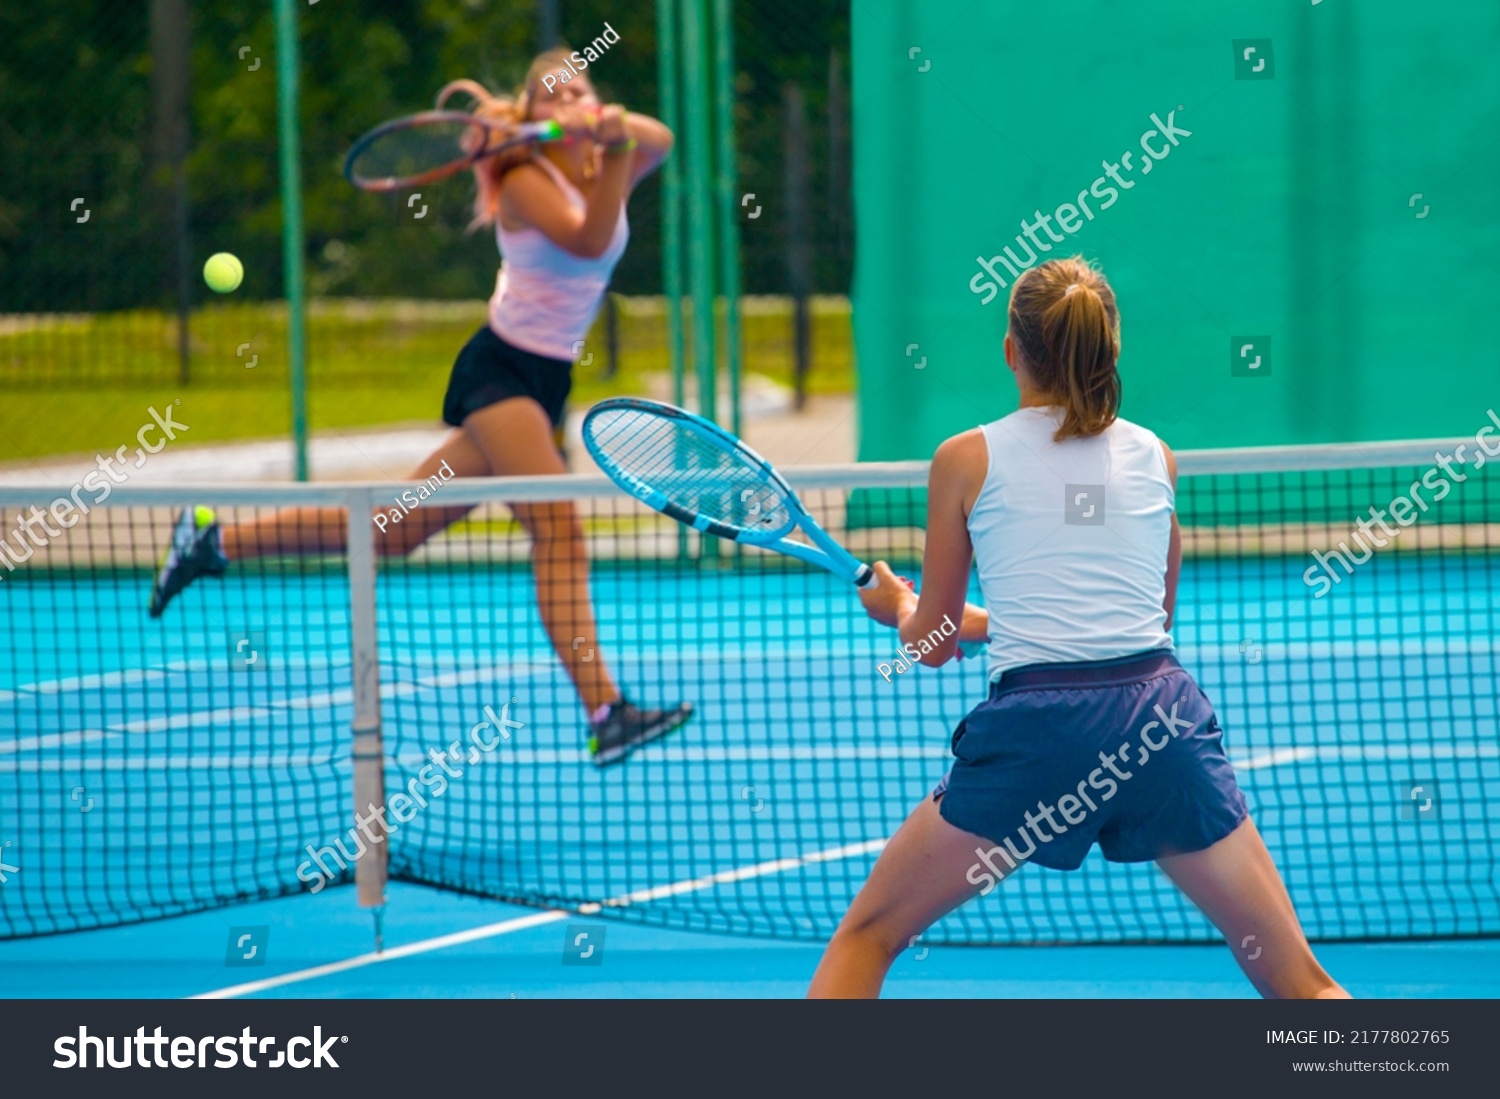 A girl plays tennis on a court with a hard blue surface on a summer sunny day #2177802765